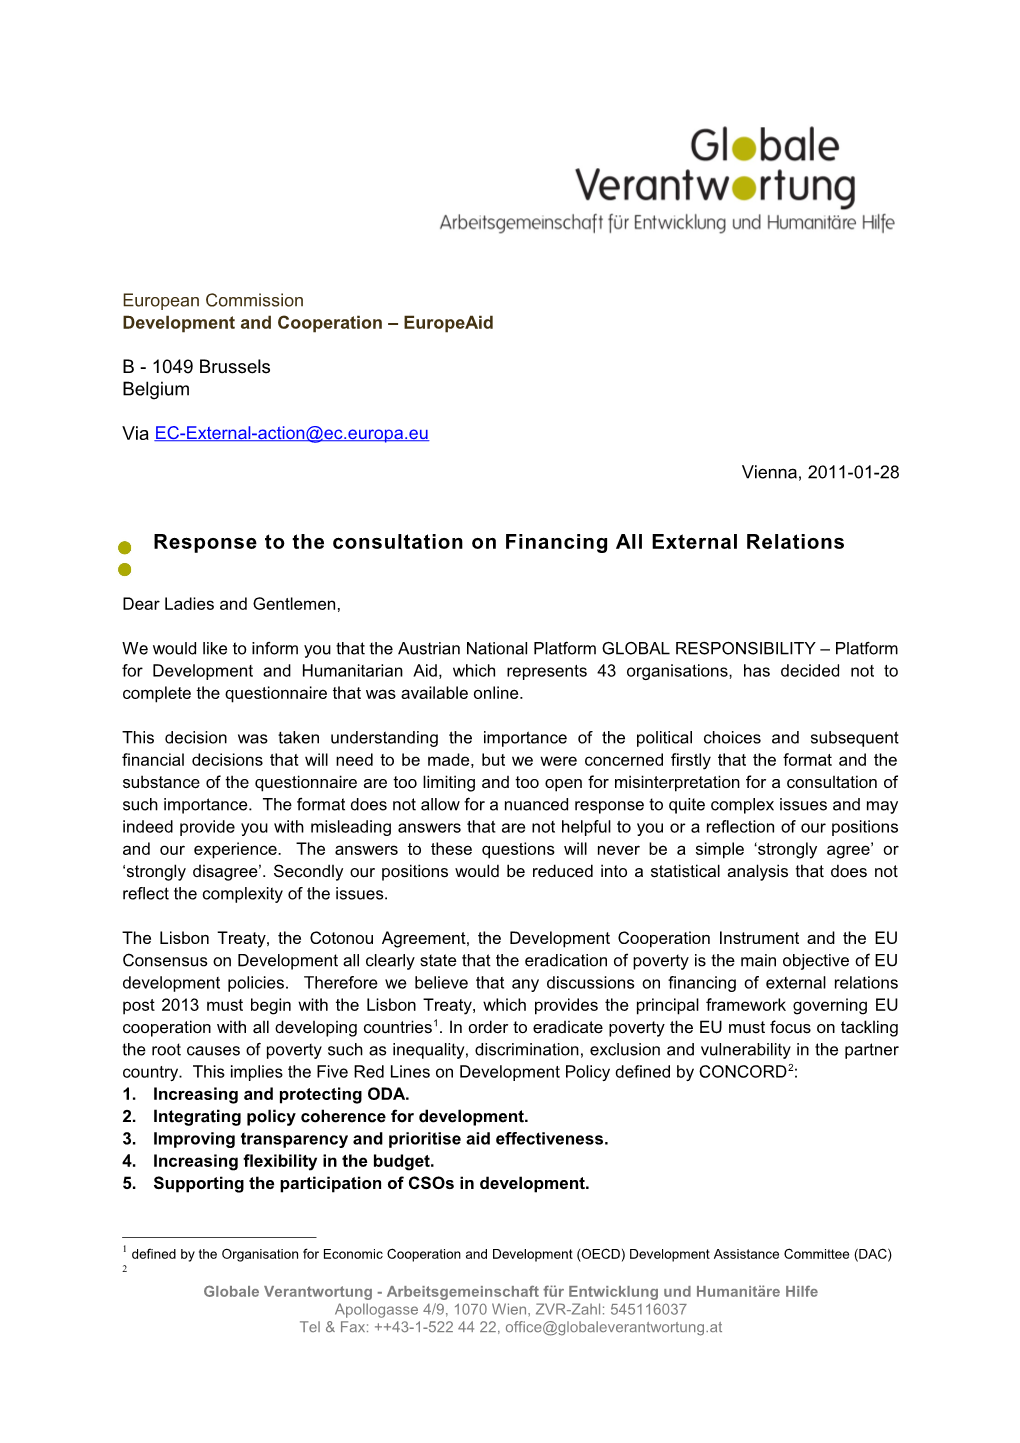 Response to the Consultation on Financing All External Relations